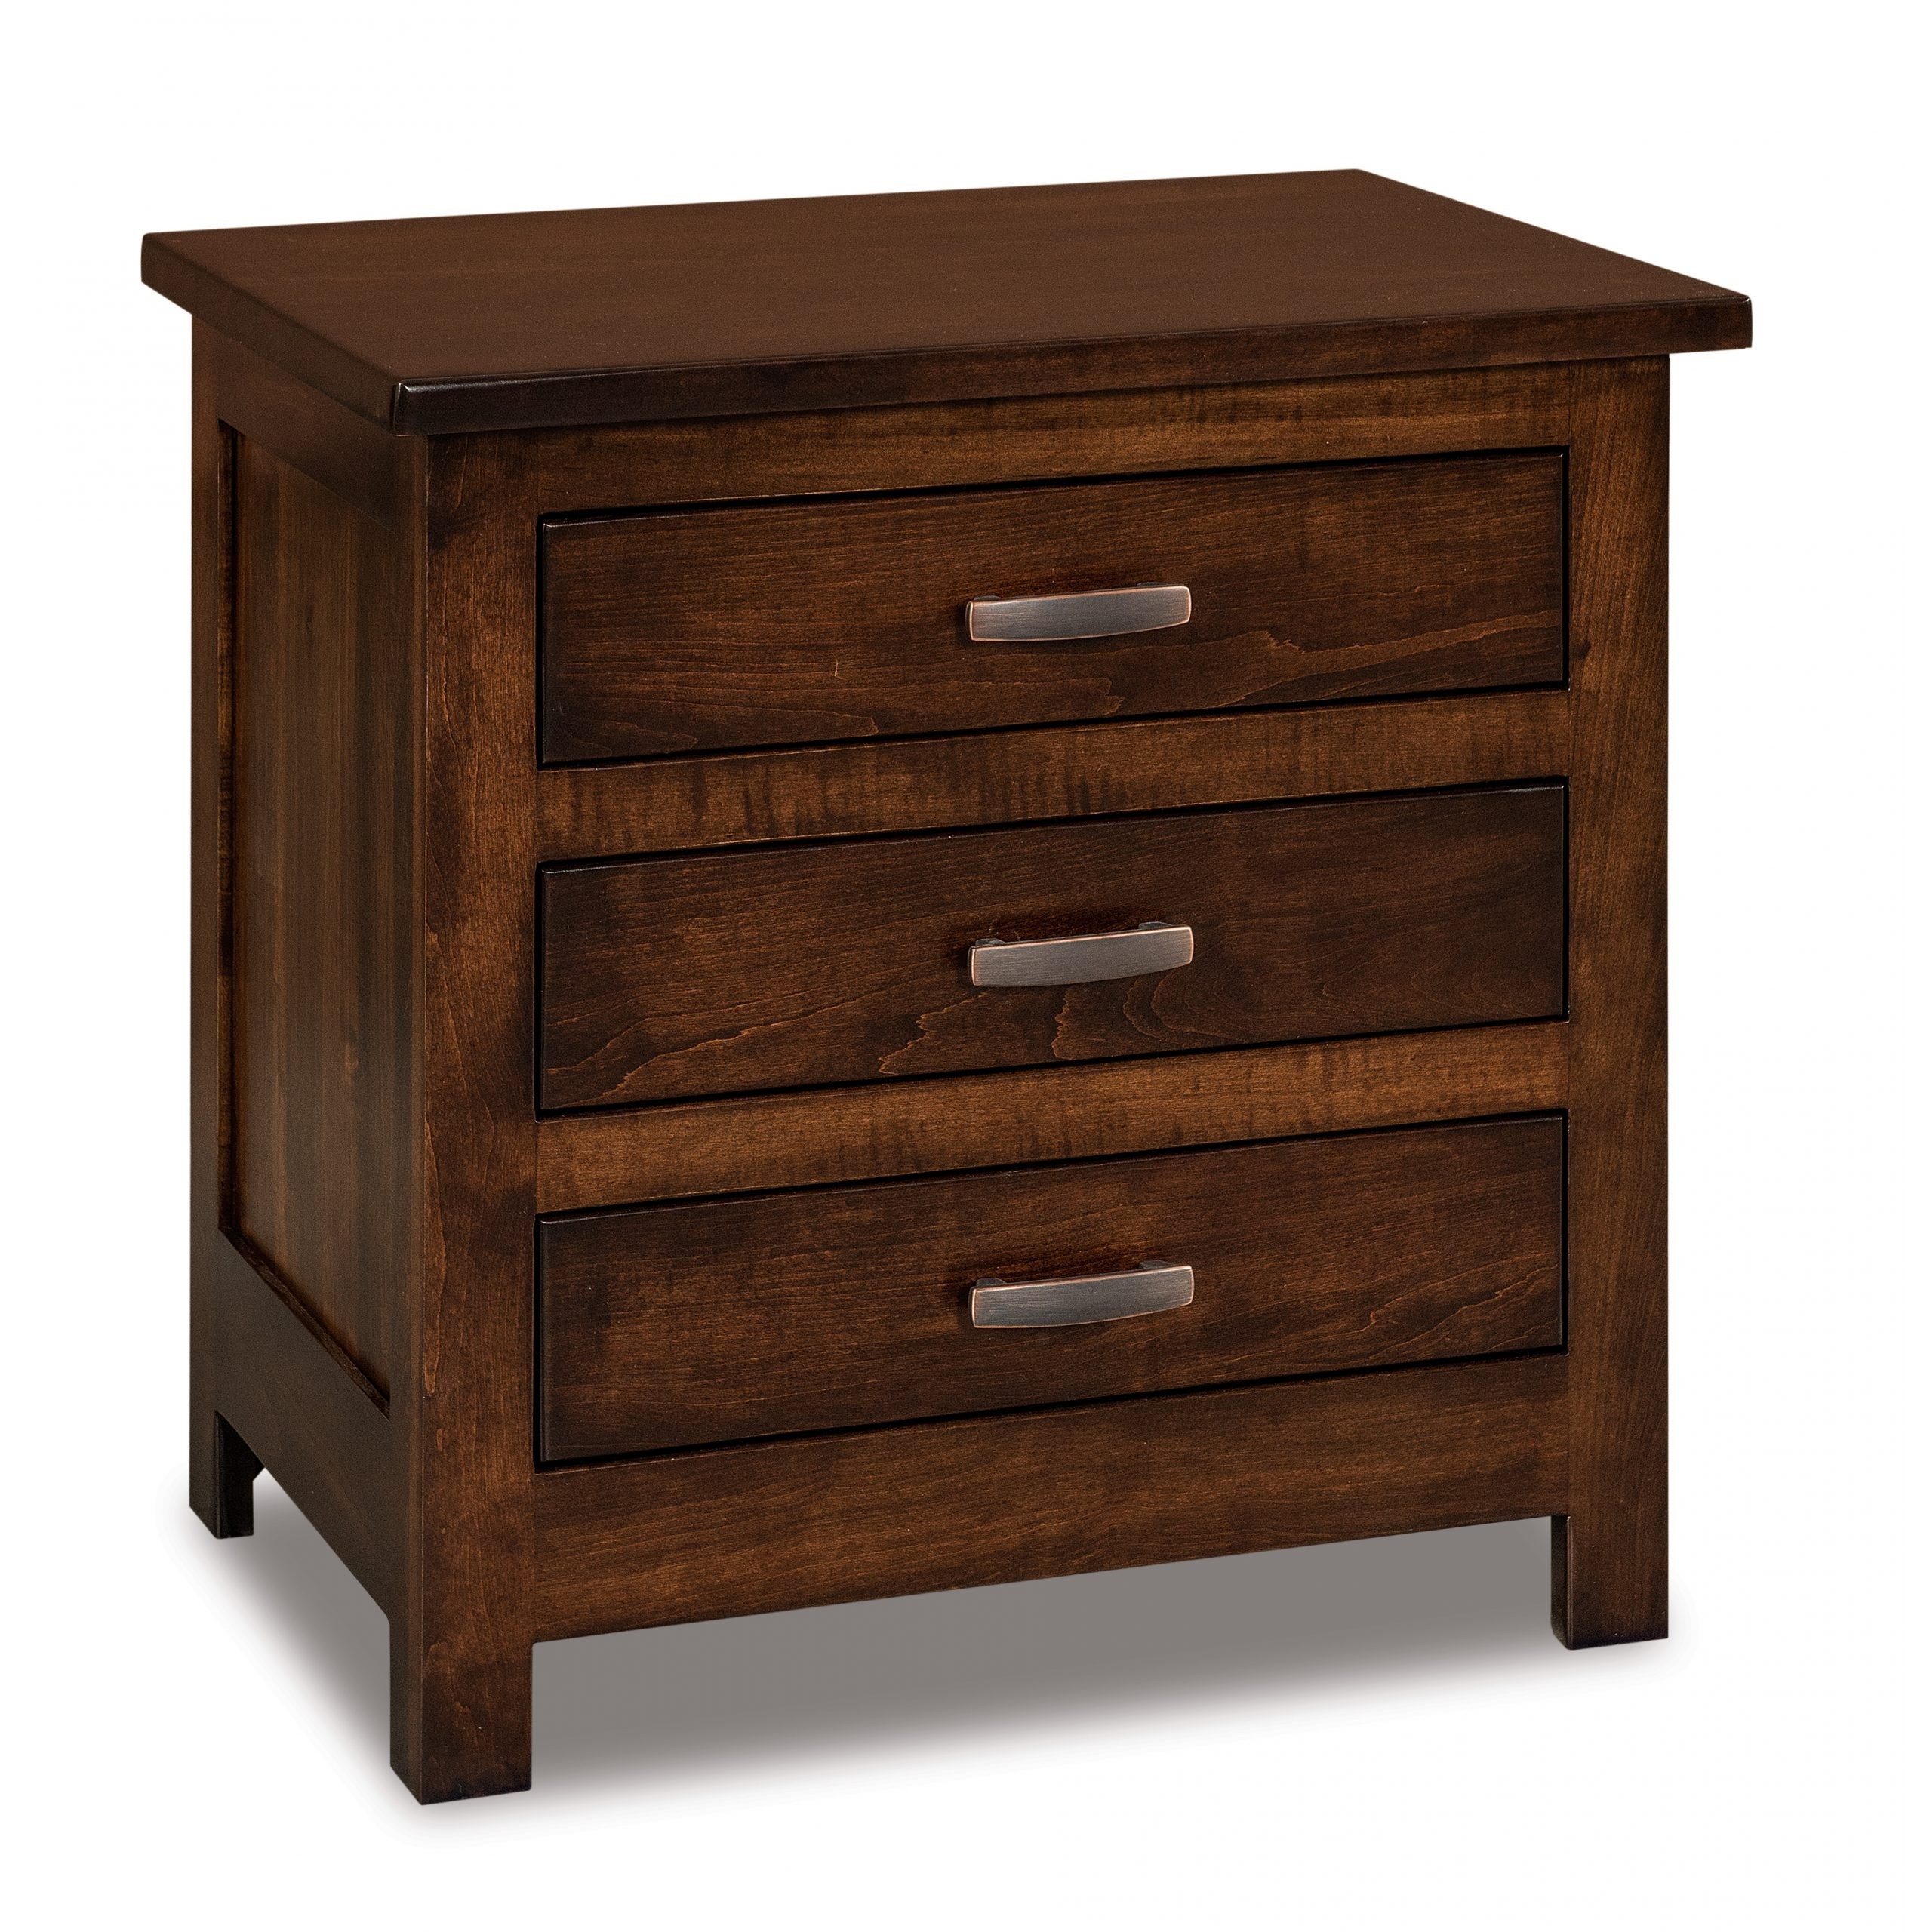 Flush mission nightstands various styles kvadro furniture